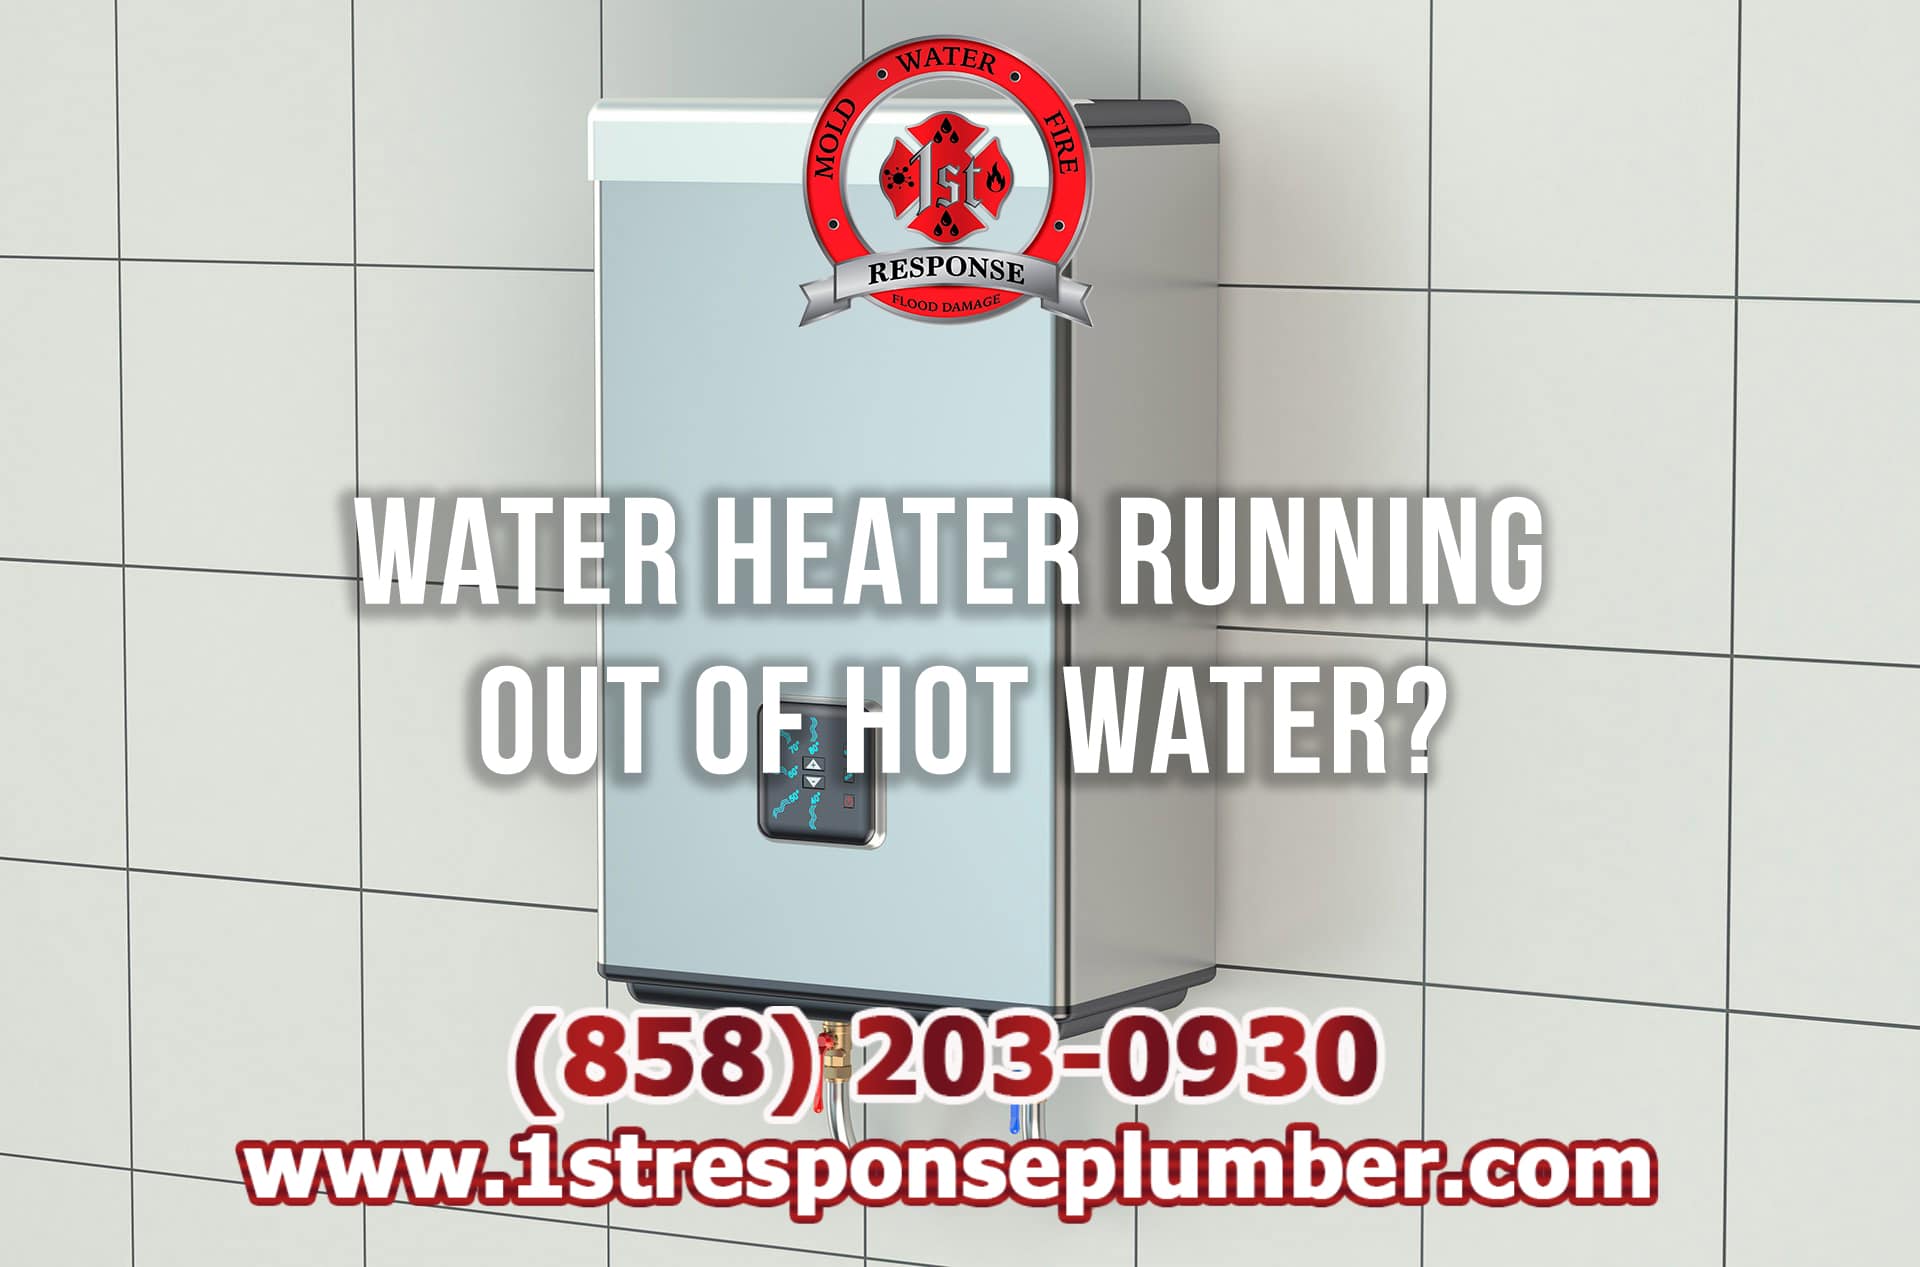 water-heater-running-out-of-hot-water-in-chula-vista-1st-response